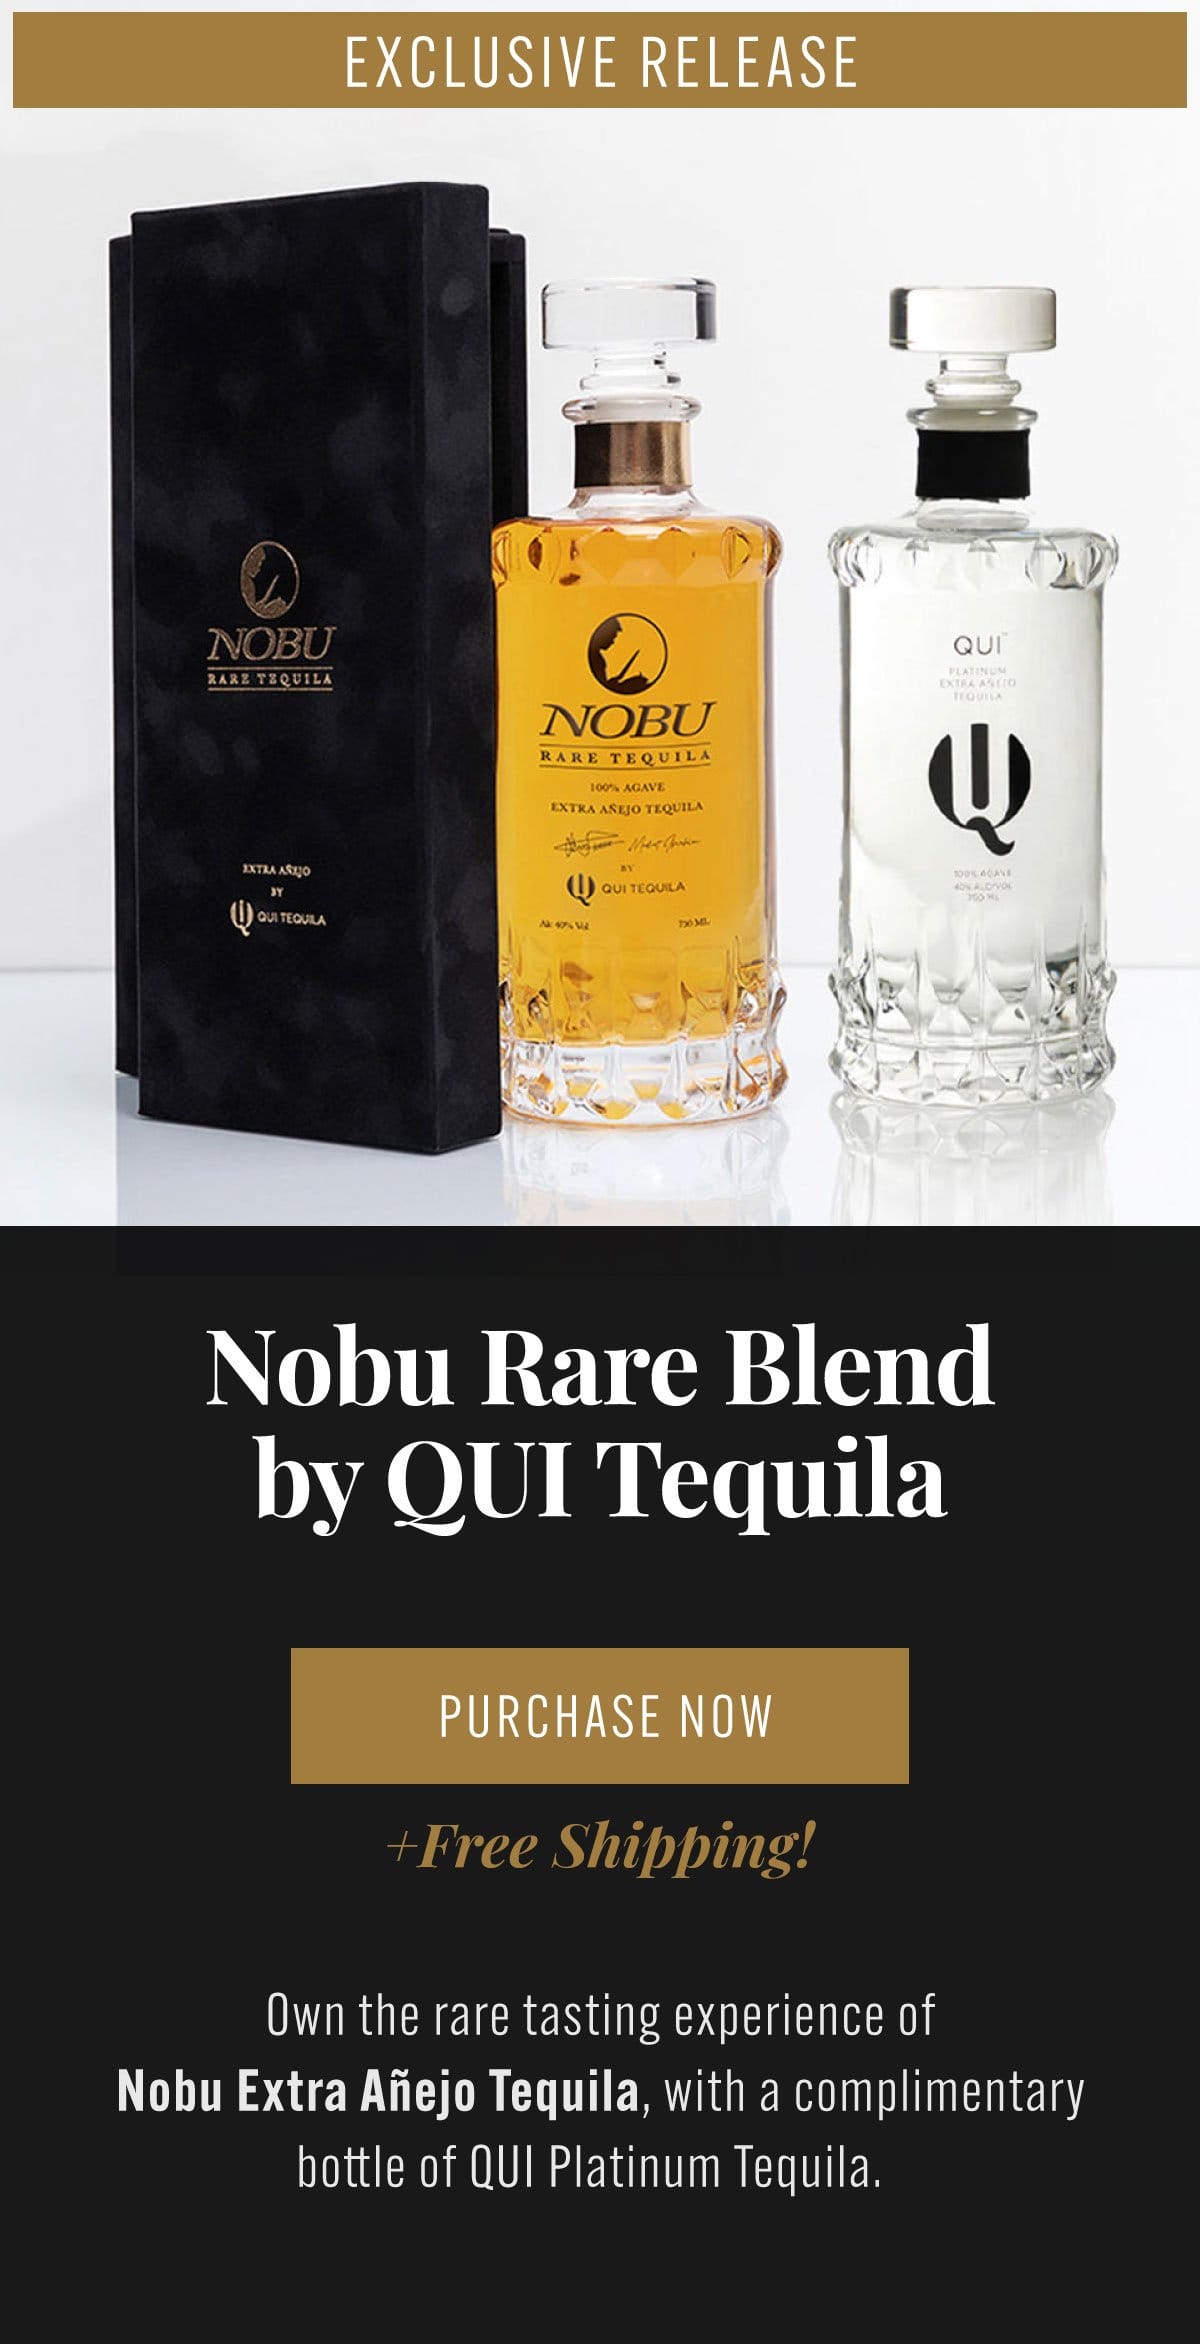 Exclusive release! Nobu Rare Blend by QUI Tequila. Own the rare tasting experience, includes a complimentary bottle of QUI Platinum Tequila.. Click to purchase now with free shipping.